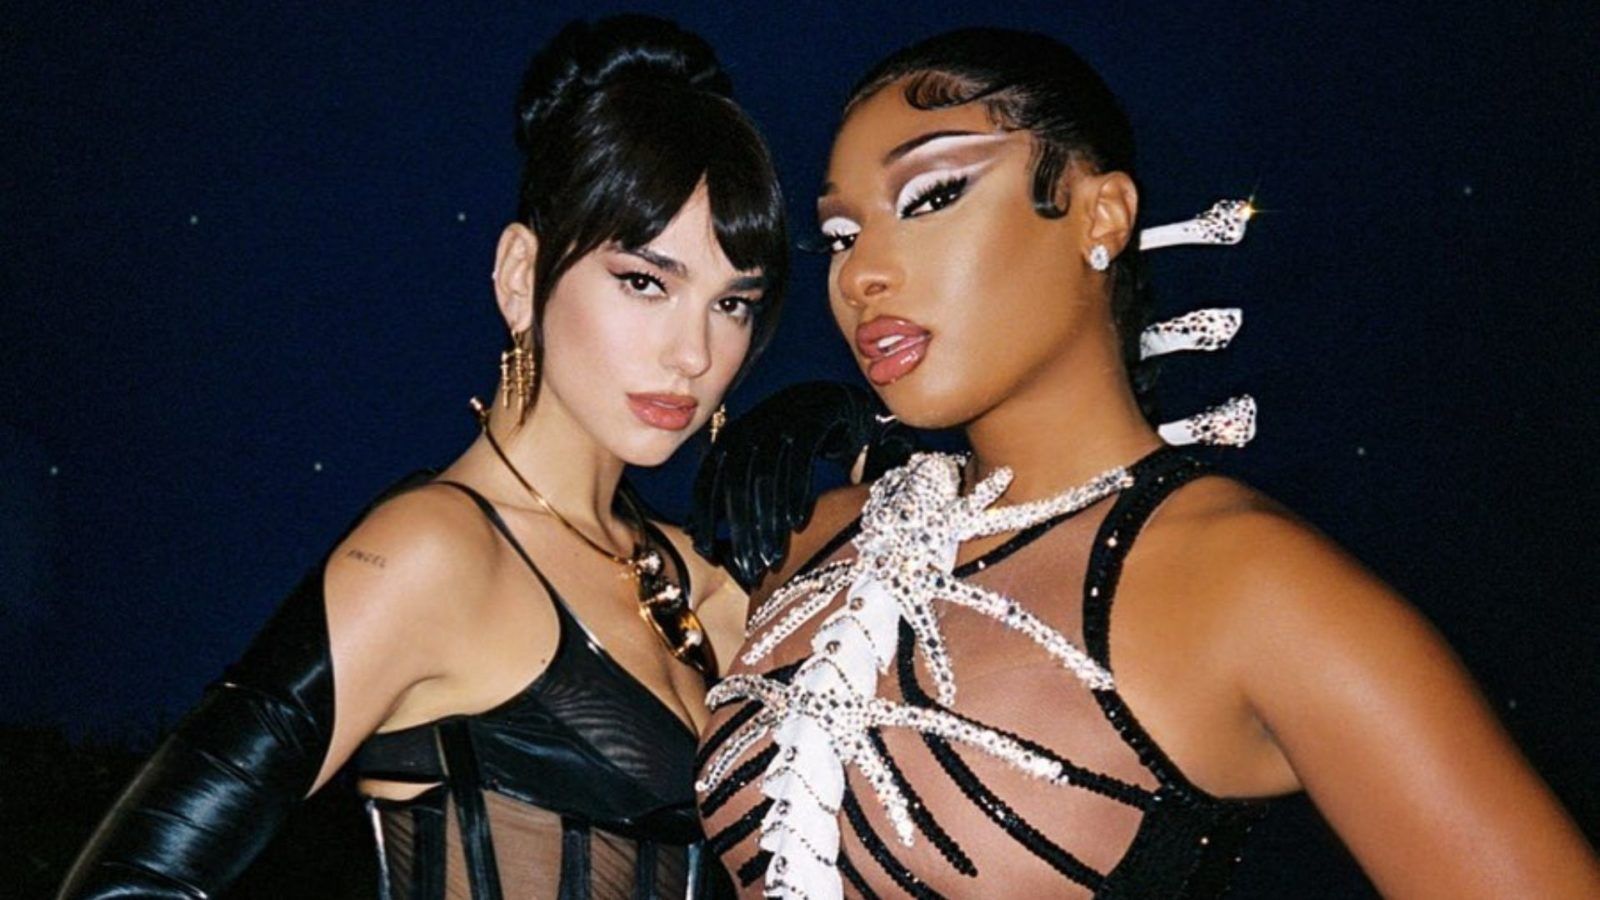 Dua Lipa and Megan Thee Stallion come together for ‘Sweetest Pie’ single